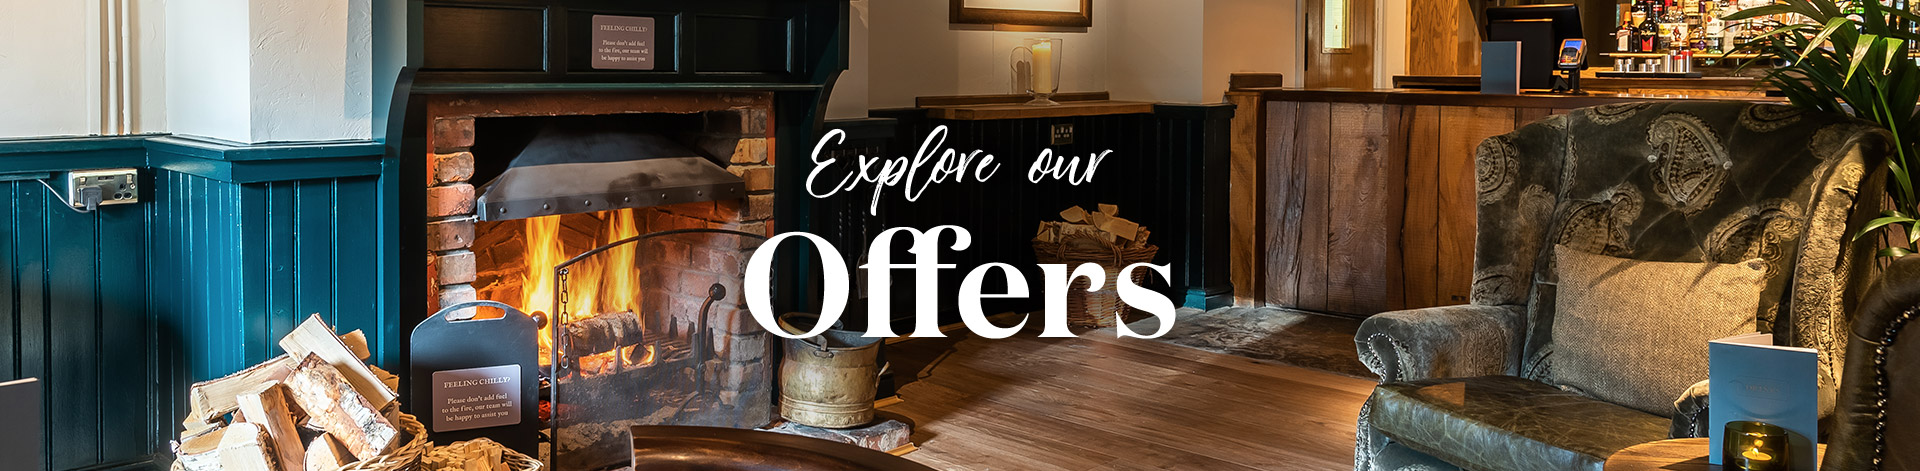 Our latest offers at The Priory